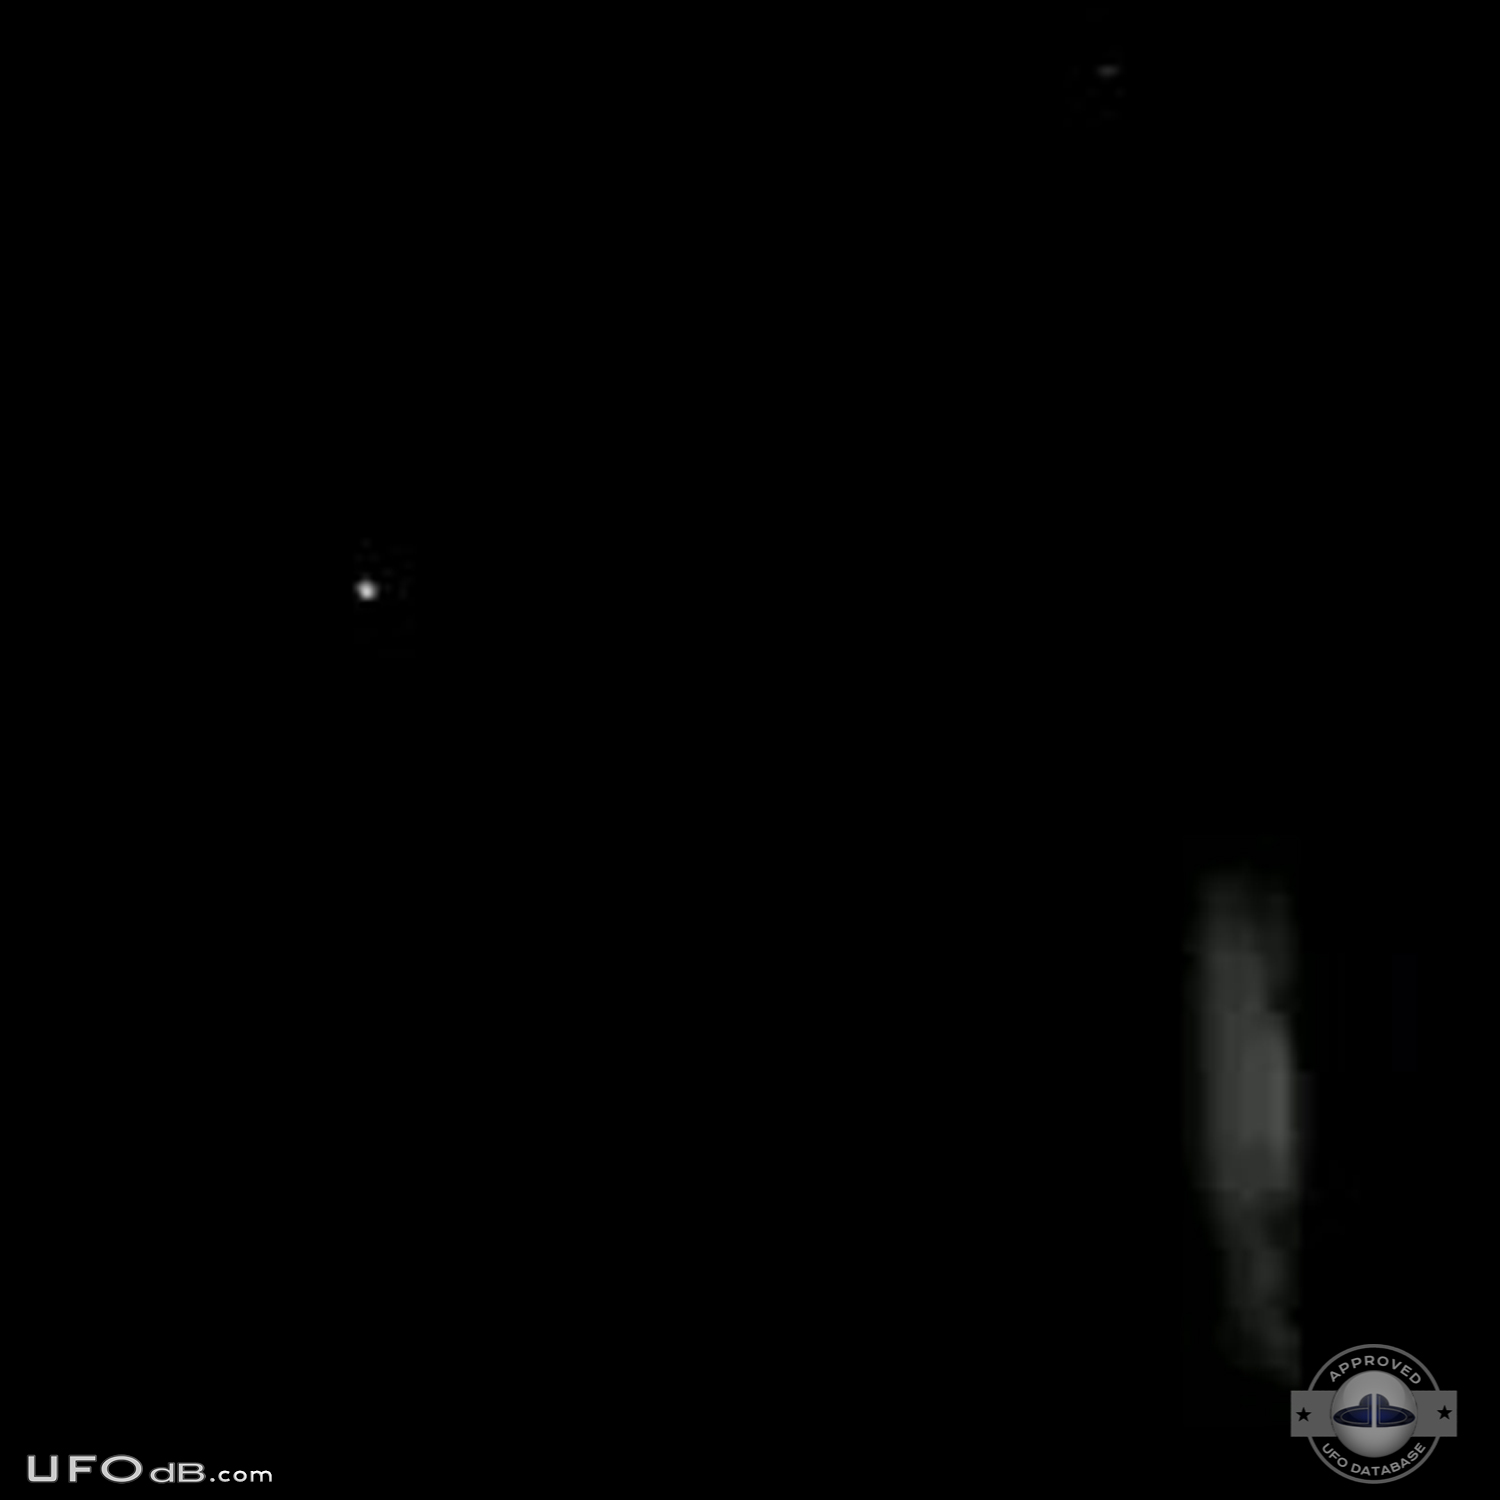 UFO changing shapes in the night over Concord in California - 2013 UFO Picture #544-2